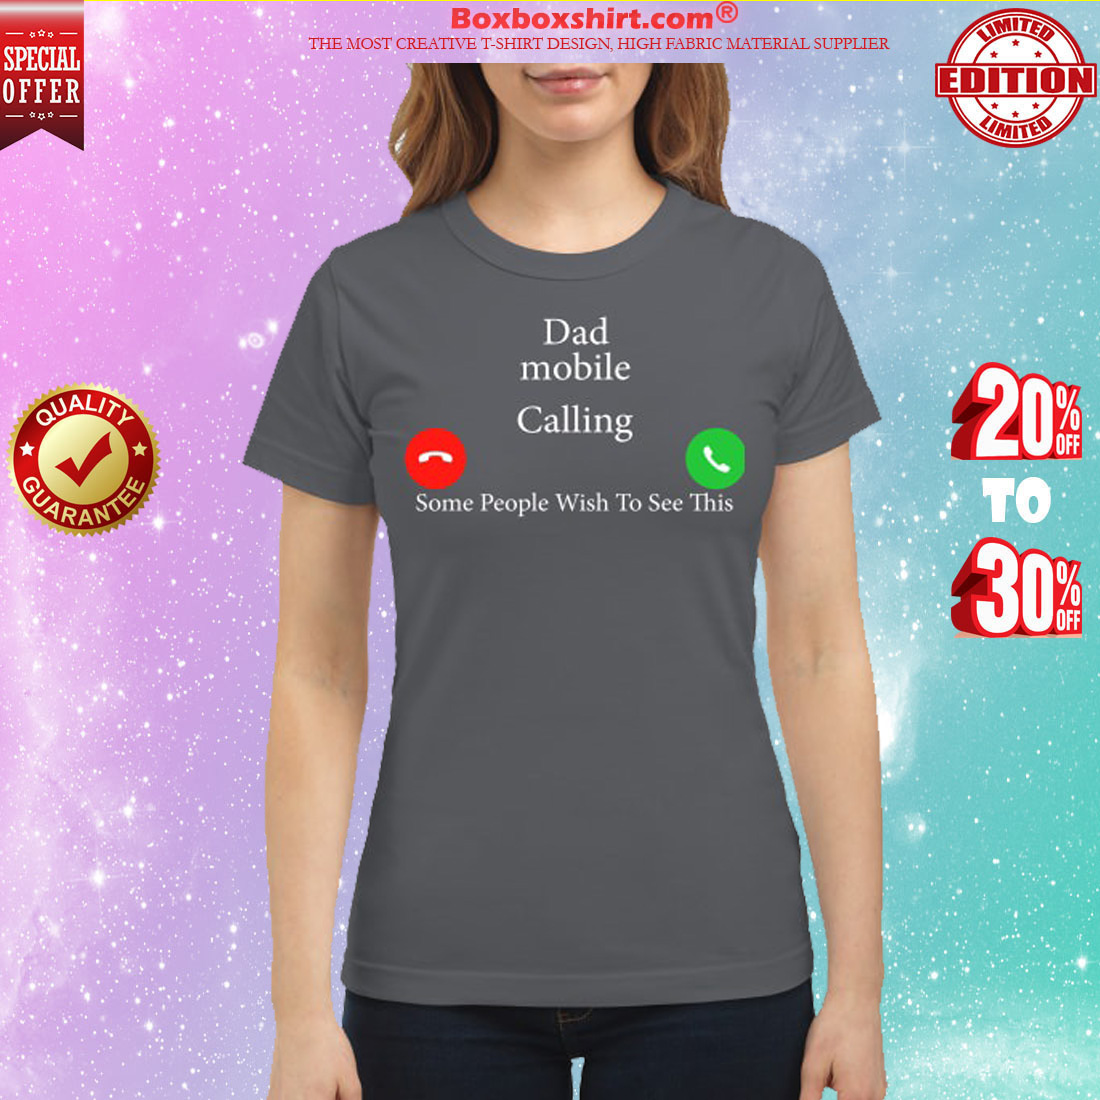 Dad mobile calling some people wish to see this classic shirt